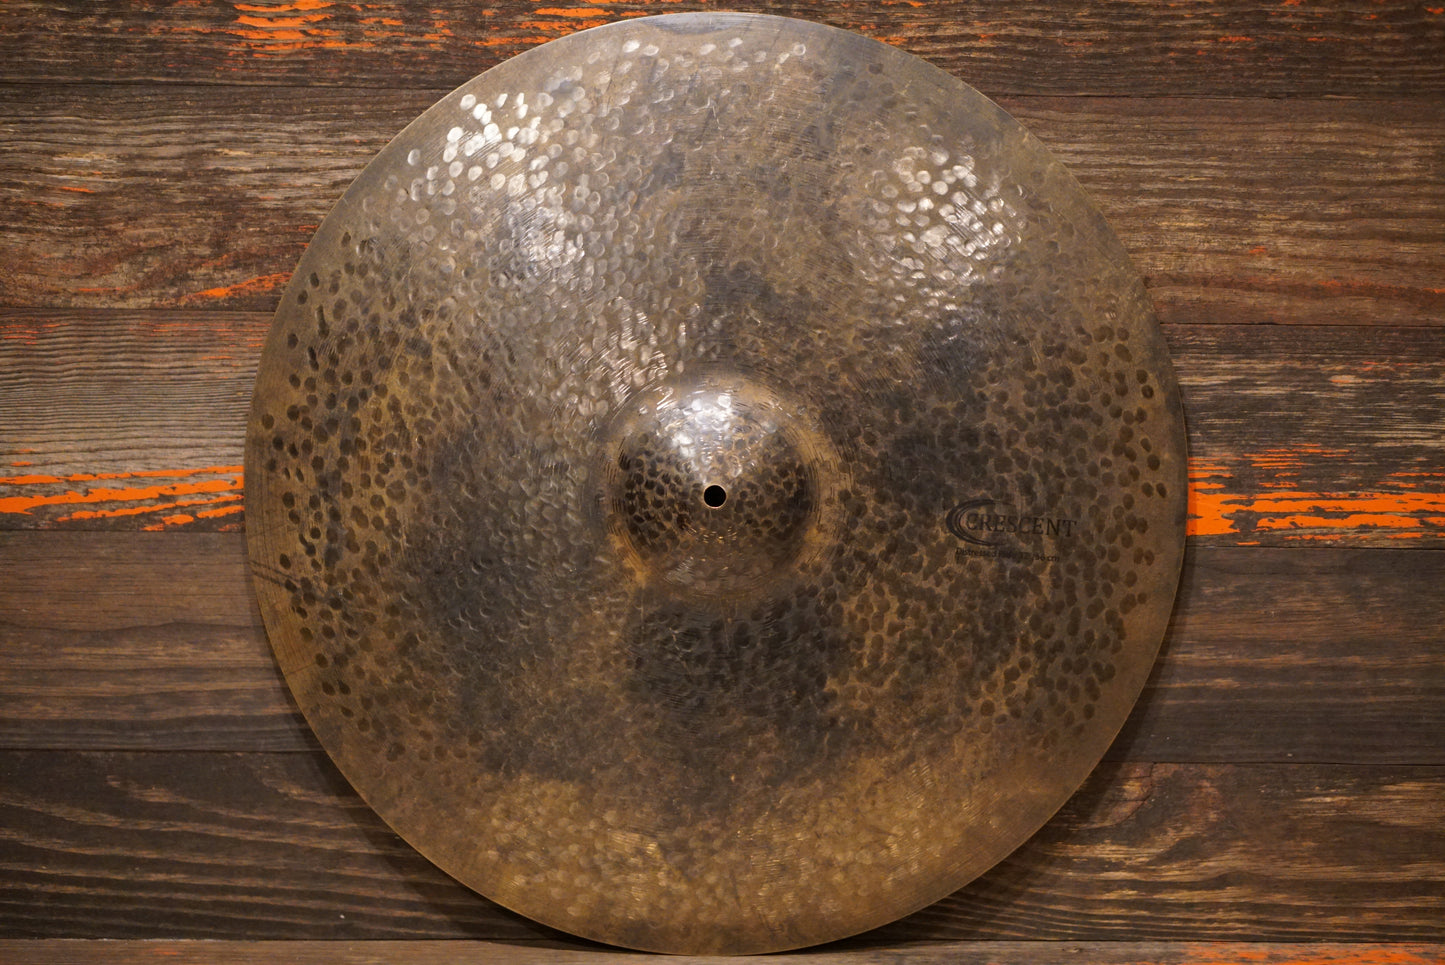 Crescent 22" Element Distressed Ride Cymbal - 2726g